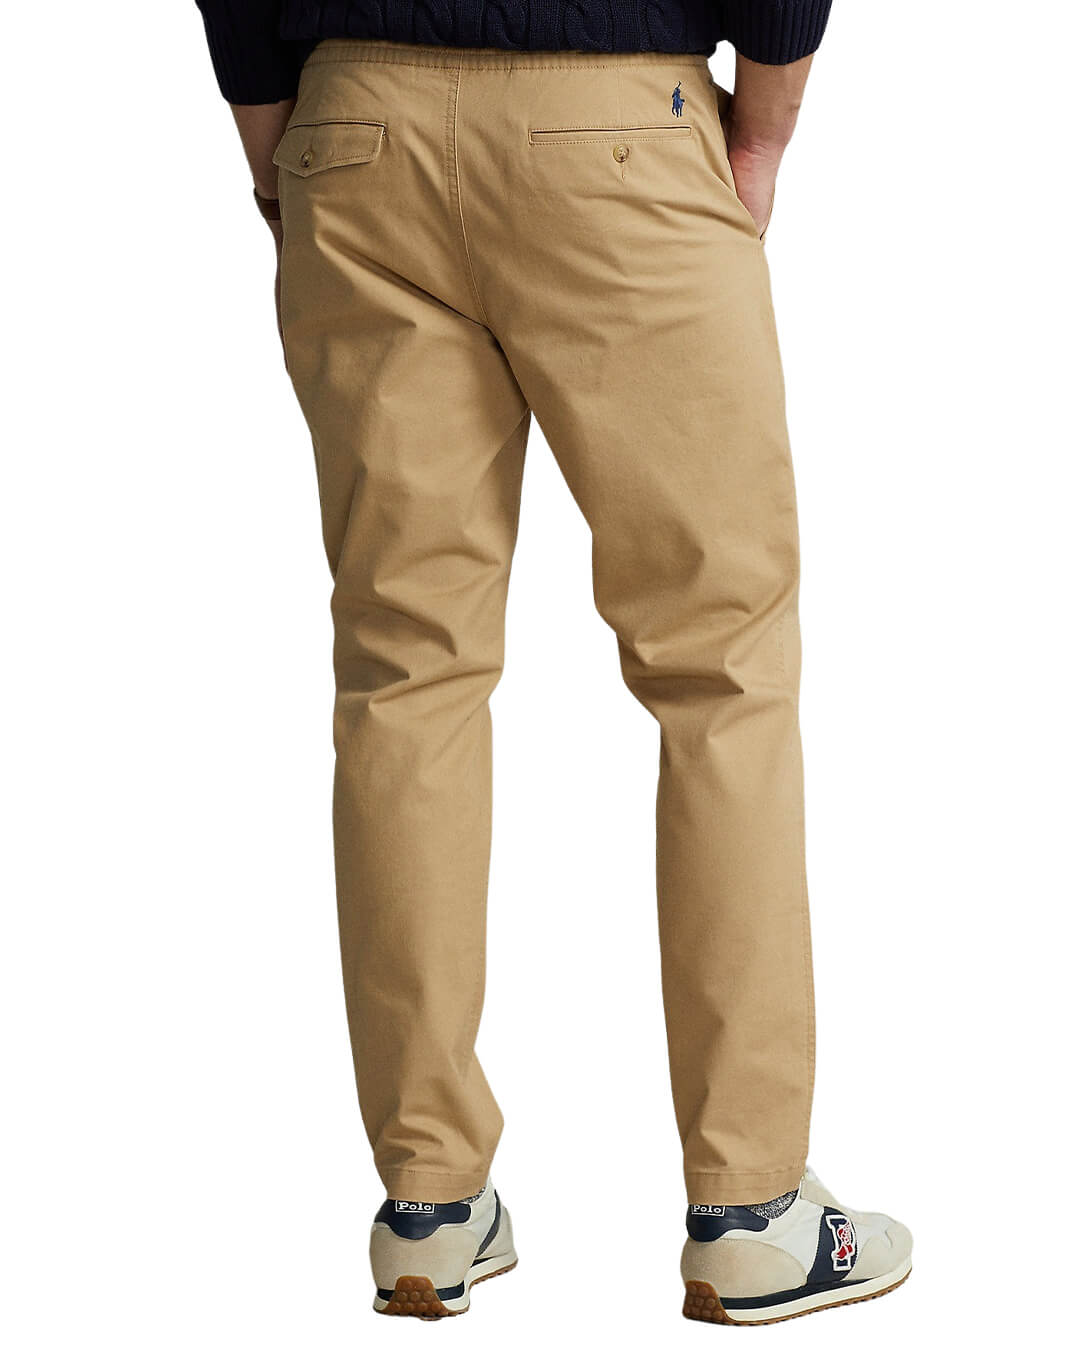 Polo Ralph Lauren Trousers Polo Ralph Lauren Prepster Classic Fit Beige Chino Trouser